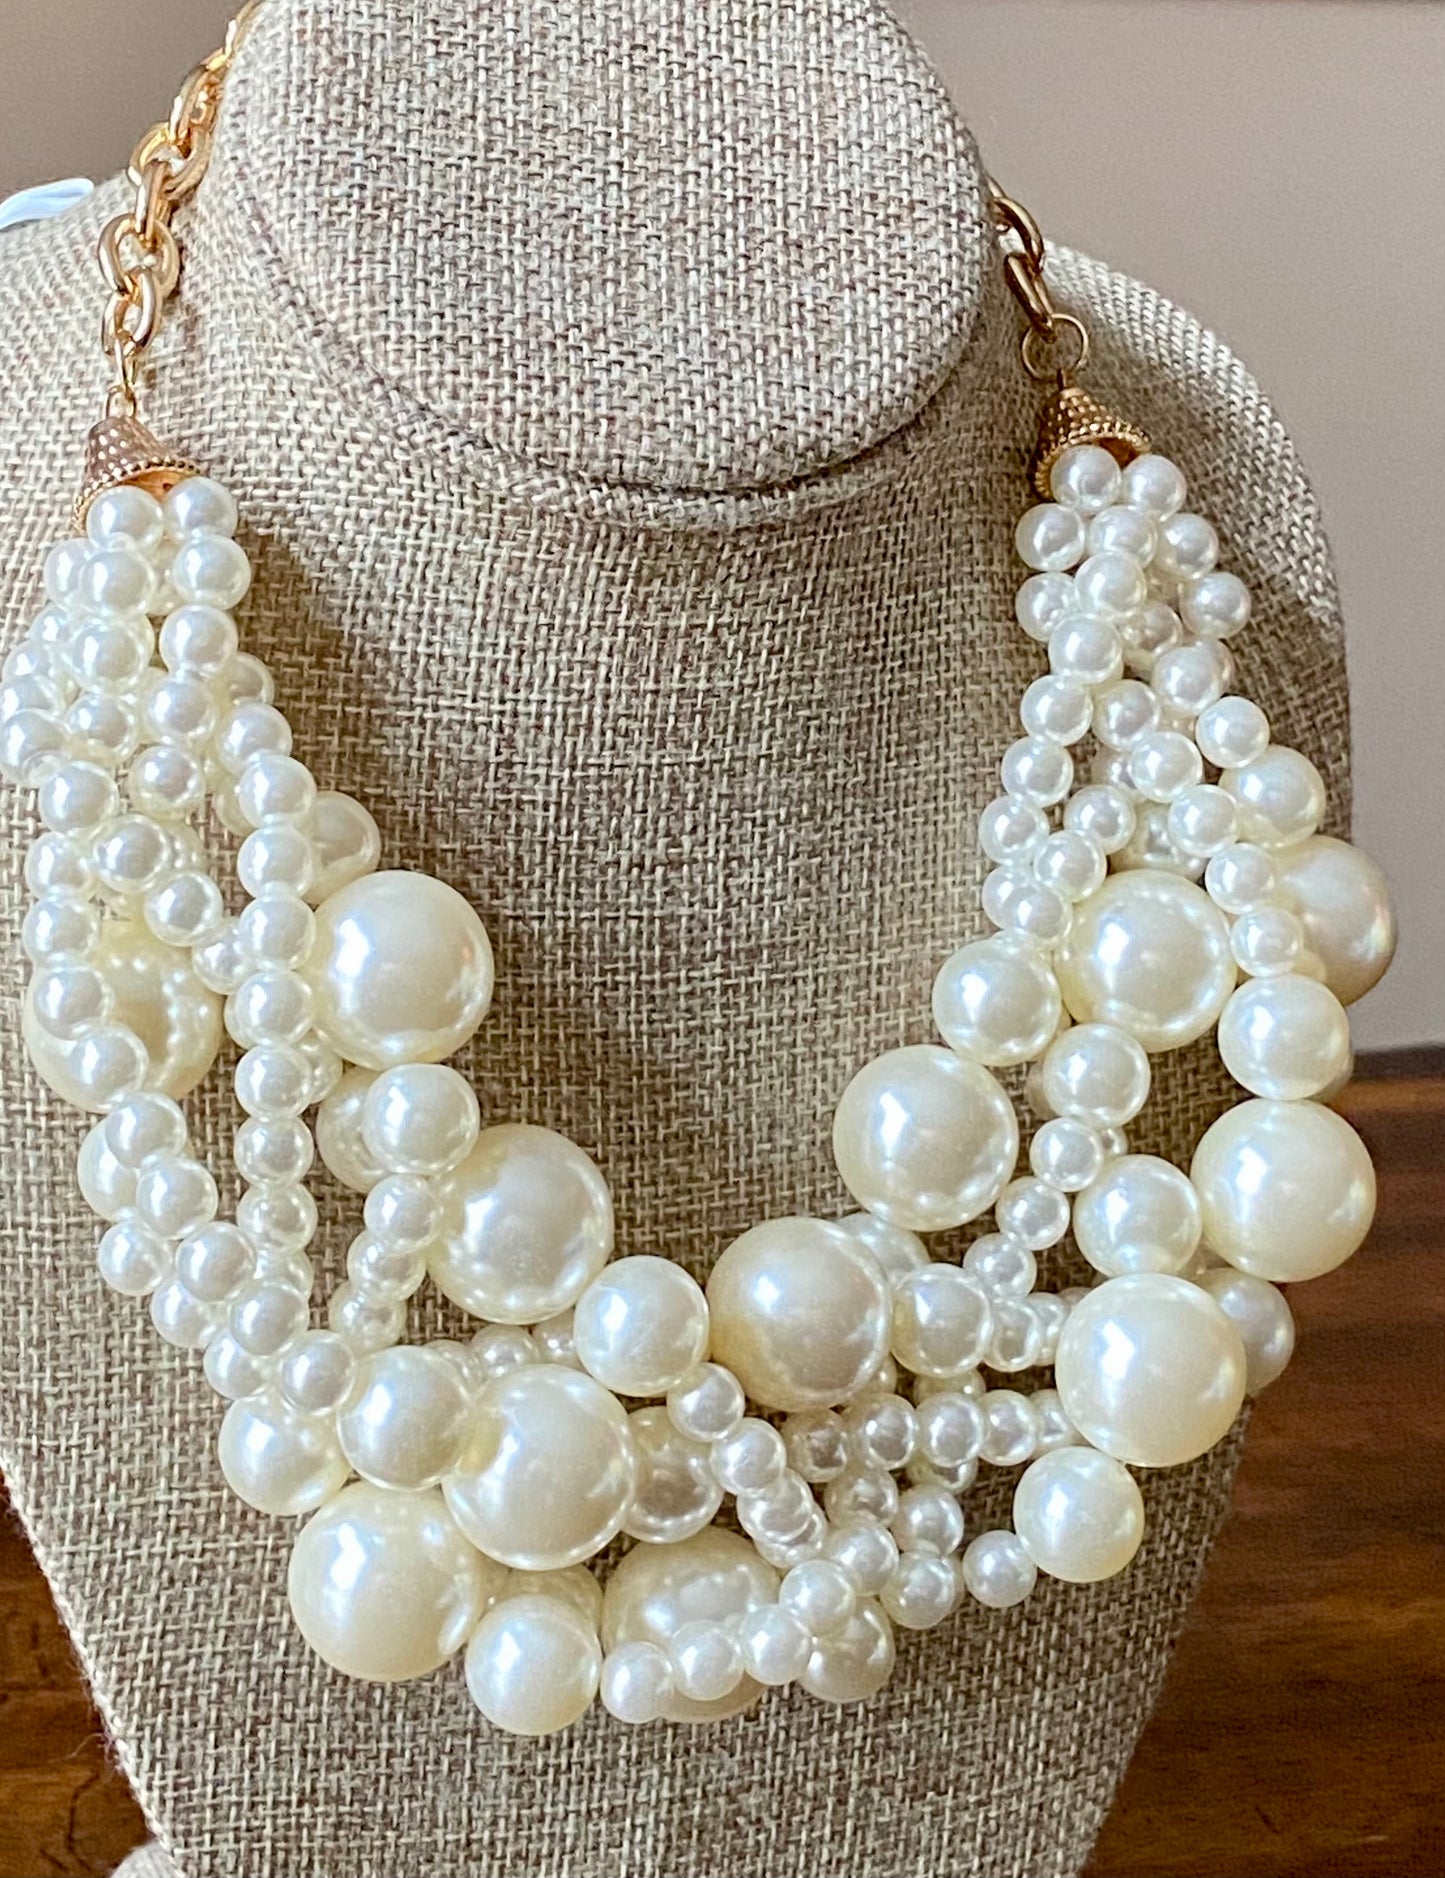 Ladies' Multi-Strand Faux Pearl Collar Necklace